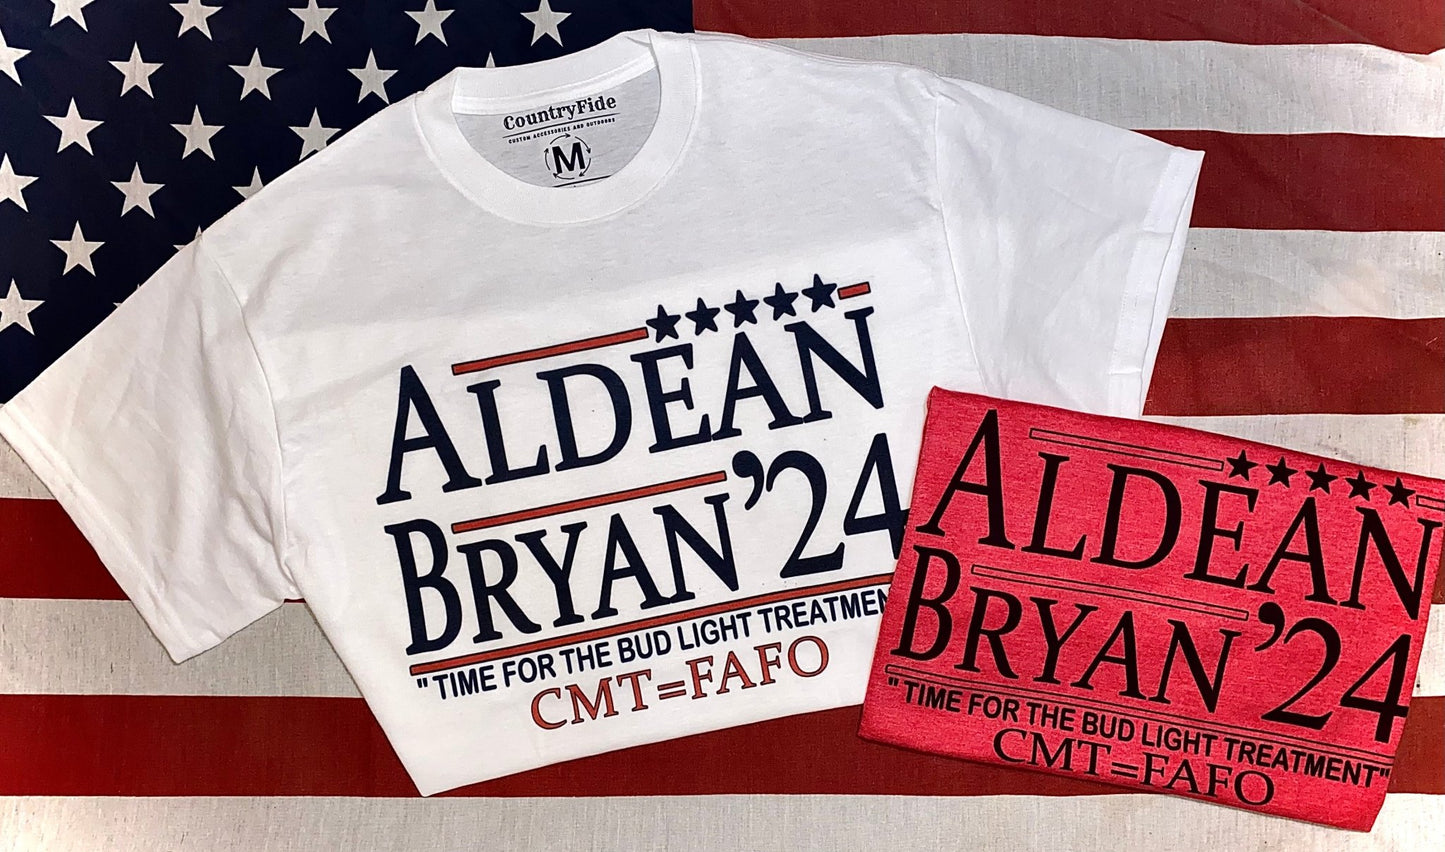 ALDEAN AND BRYAN ‘24 - CountryFide Custom Accessories and Outdoors